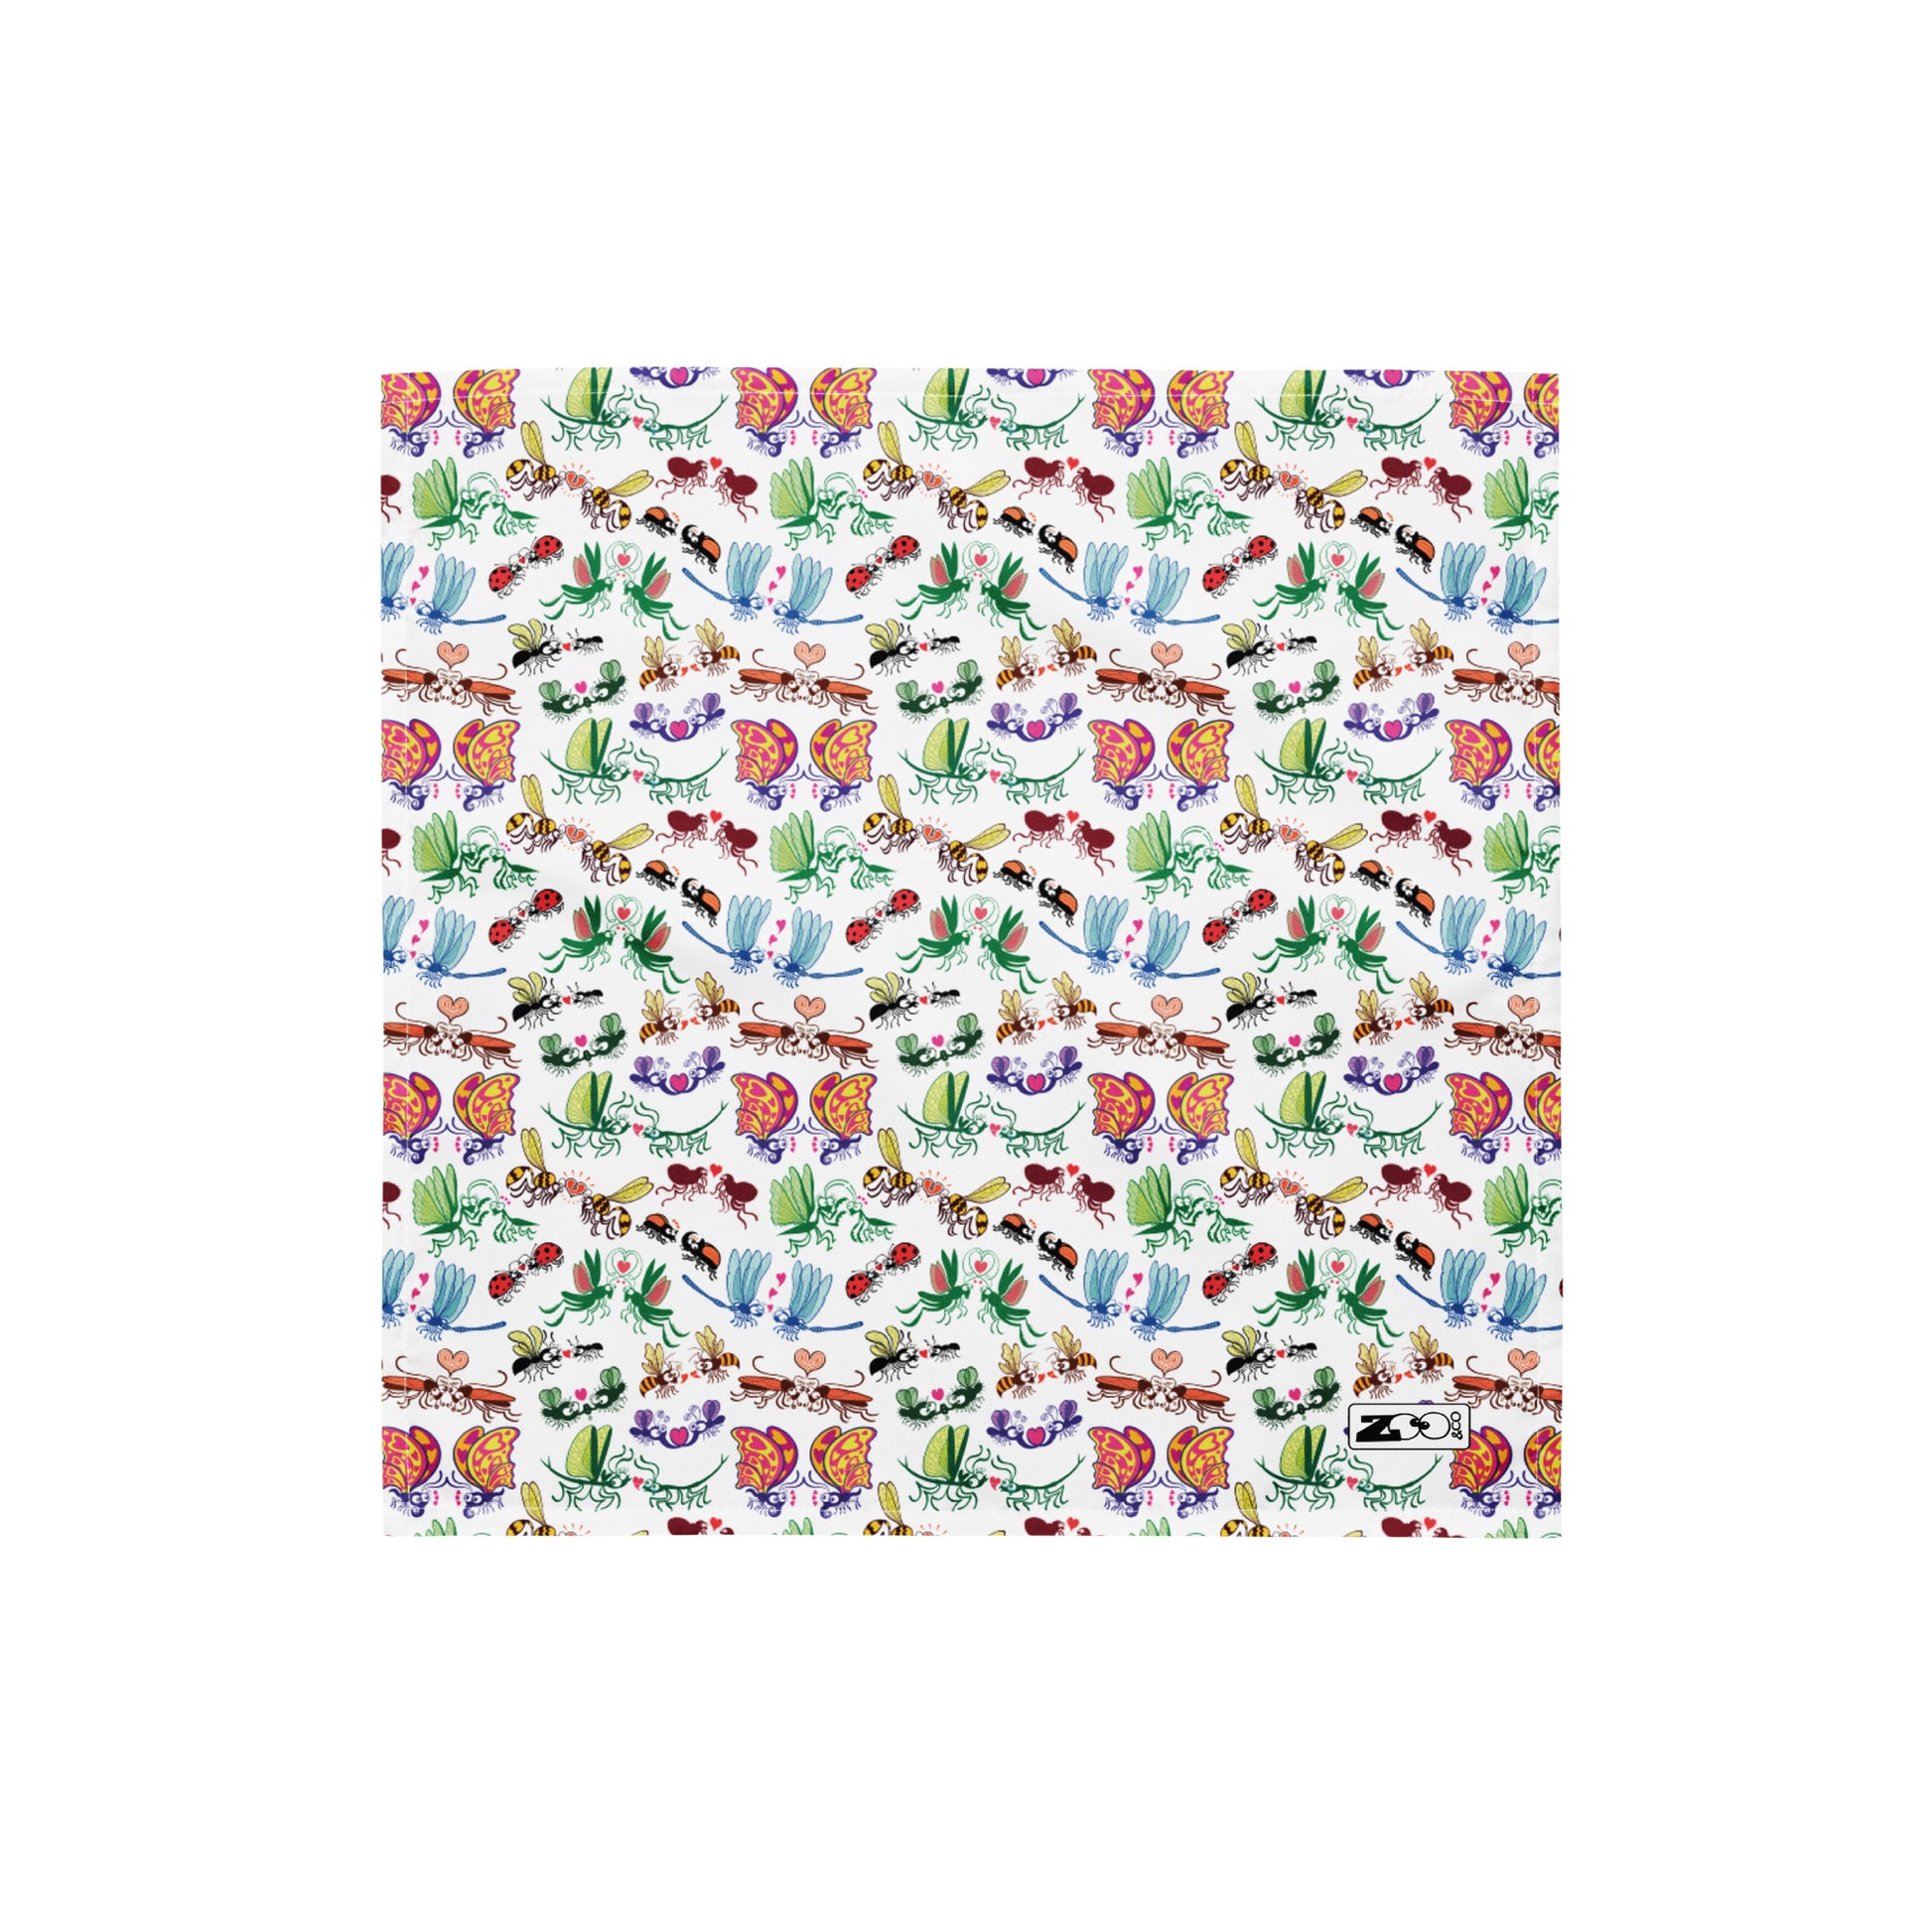 Cool insects madly in love All-over print bandana. Small size